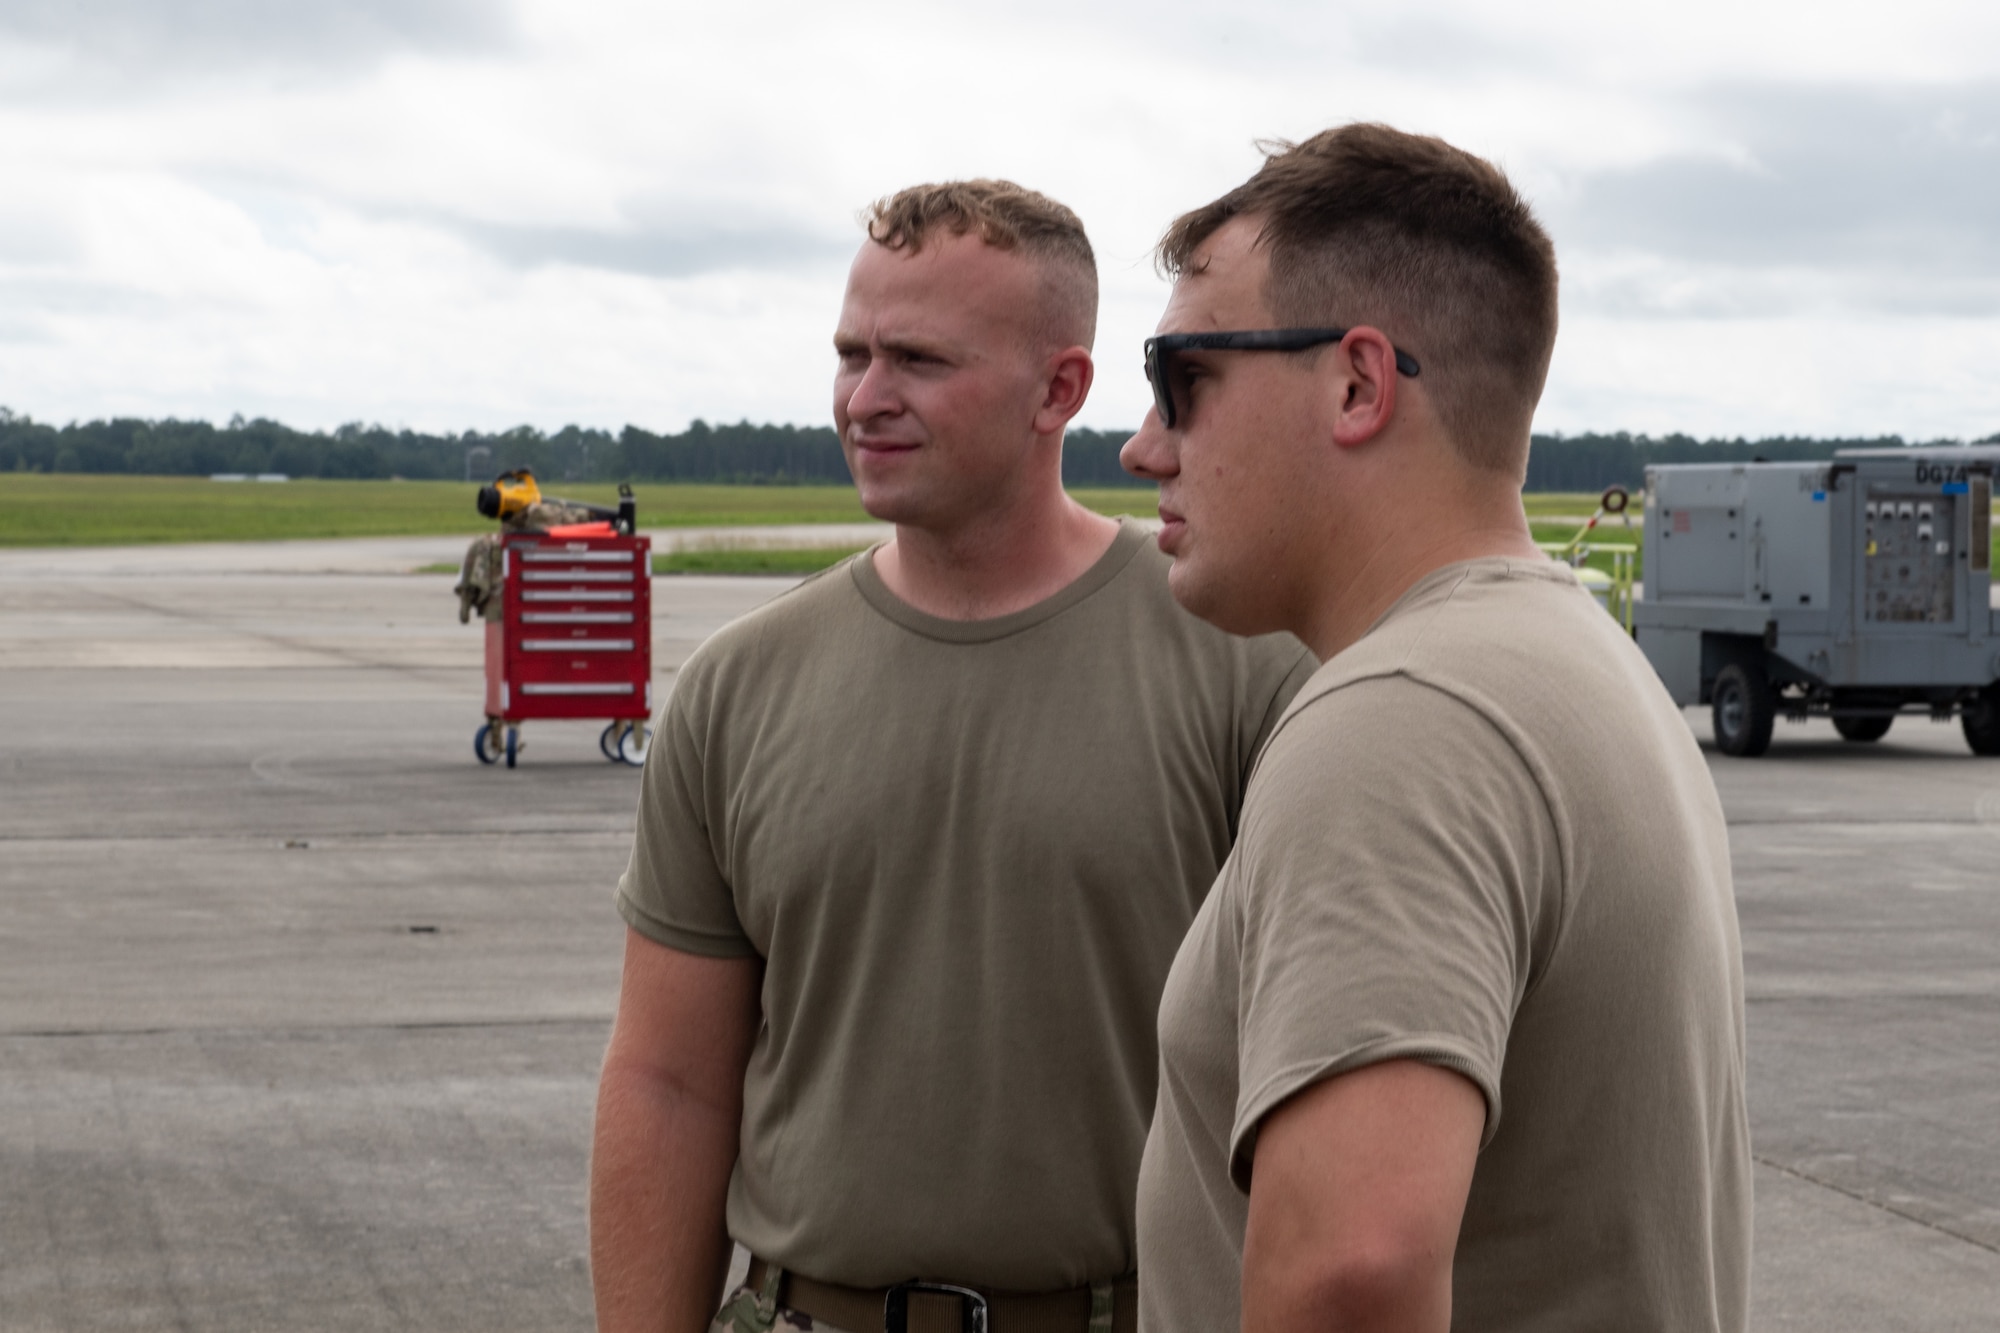 U.S. Air Force Staff Sgt. Nicholas Spangler, 71st Rescue Generation Squadron dedicated crew chief, and Senior Airman Clark Ivey, 71st RGS assistant dedicated crew chief, await the take-off of the Black Letter flight on July 12, 2022, at Moody Air Force Base, Georgia. The last documented Black Letter flight at Moody was in 2020 by the 41st Helicopter Maintenance Unit. (U.S. Air Force photo by Staff Sgt. John Crampton)